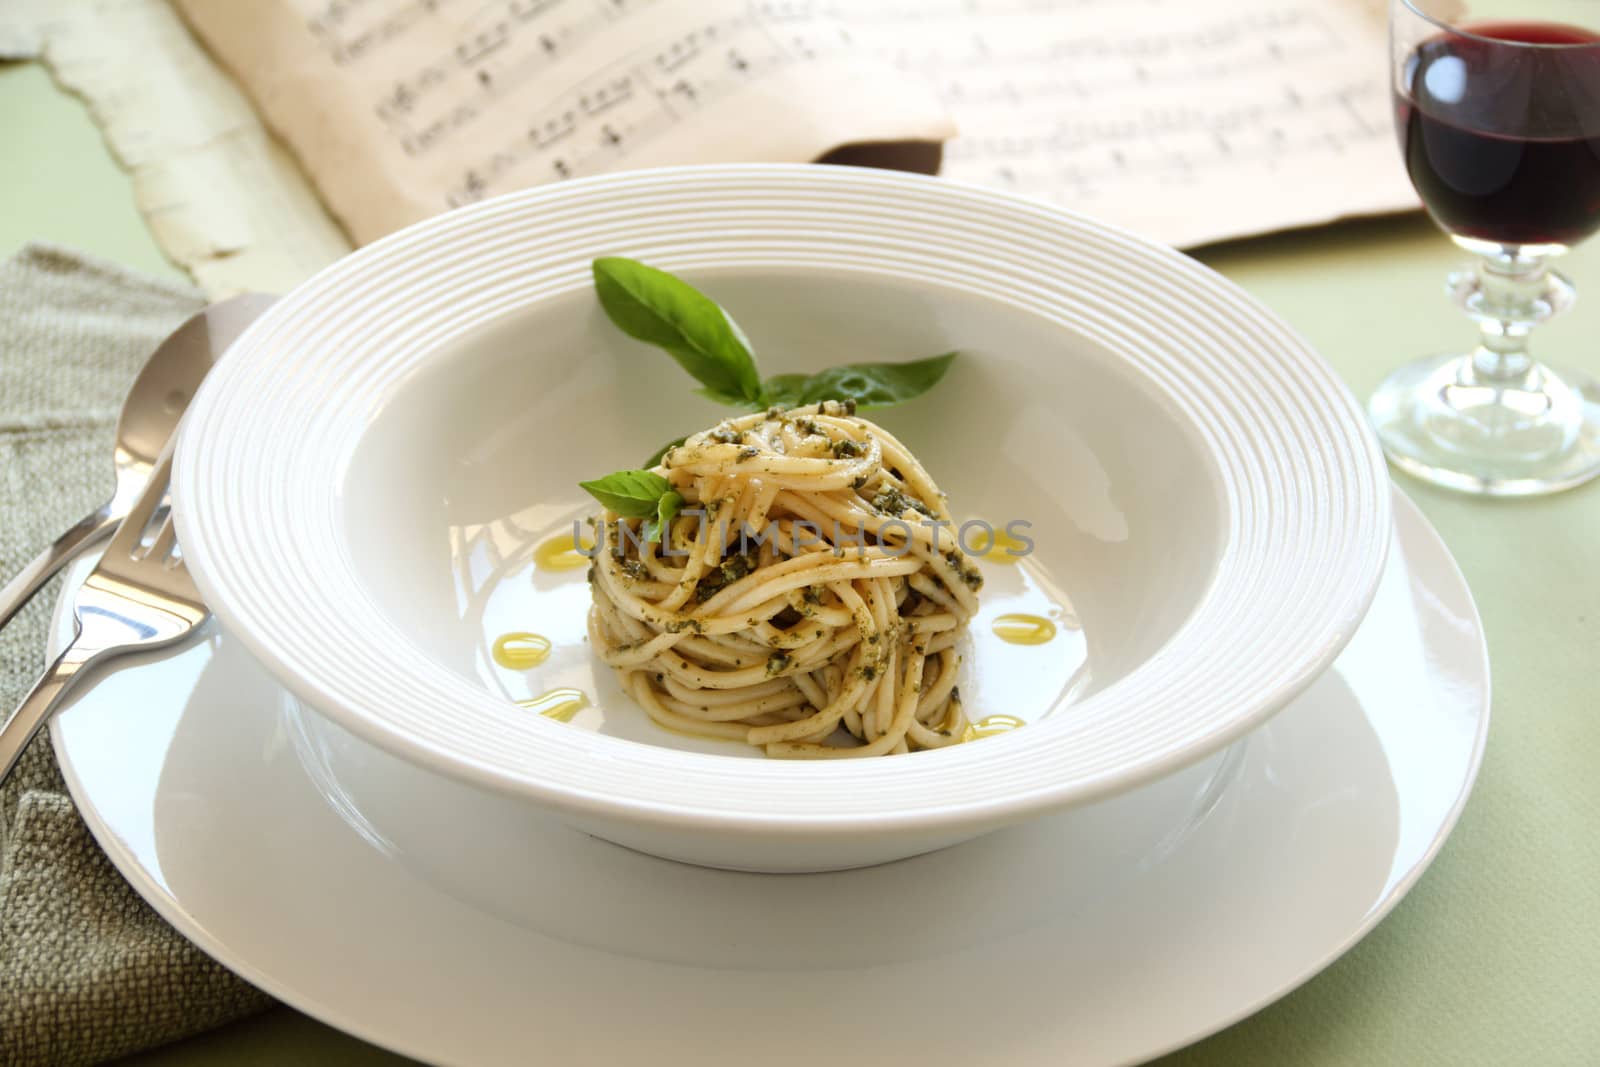 Delicious spaghetti with pesto with red wine ready to serve.